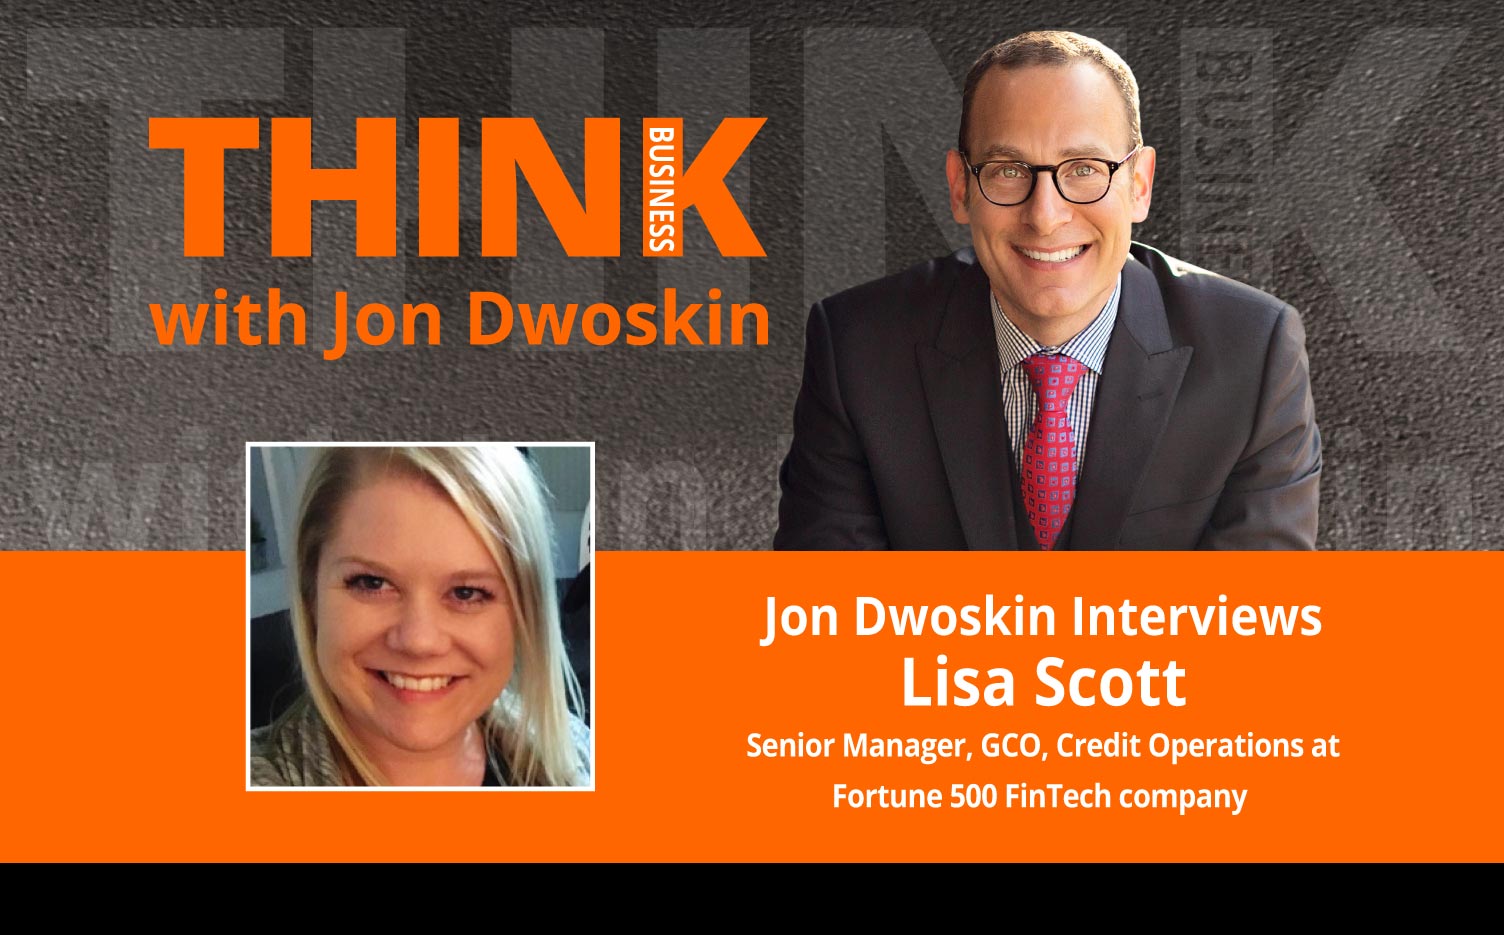 THINK Business Podcast: Jon Dwoskin Interviews Lisa Scott, Senior Manager, GCO, Credit Operations at Fortune 500 FinTech company 